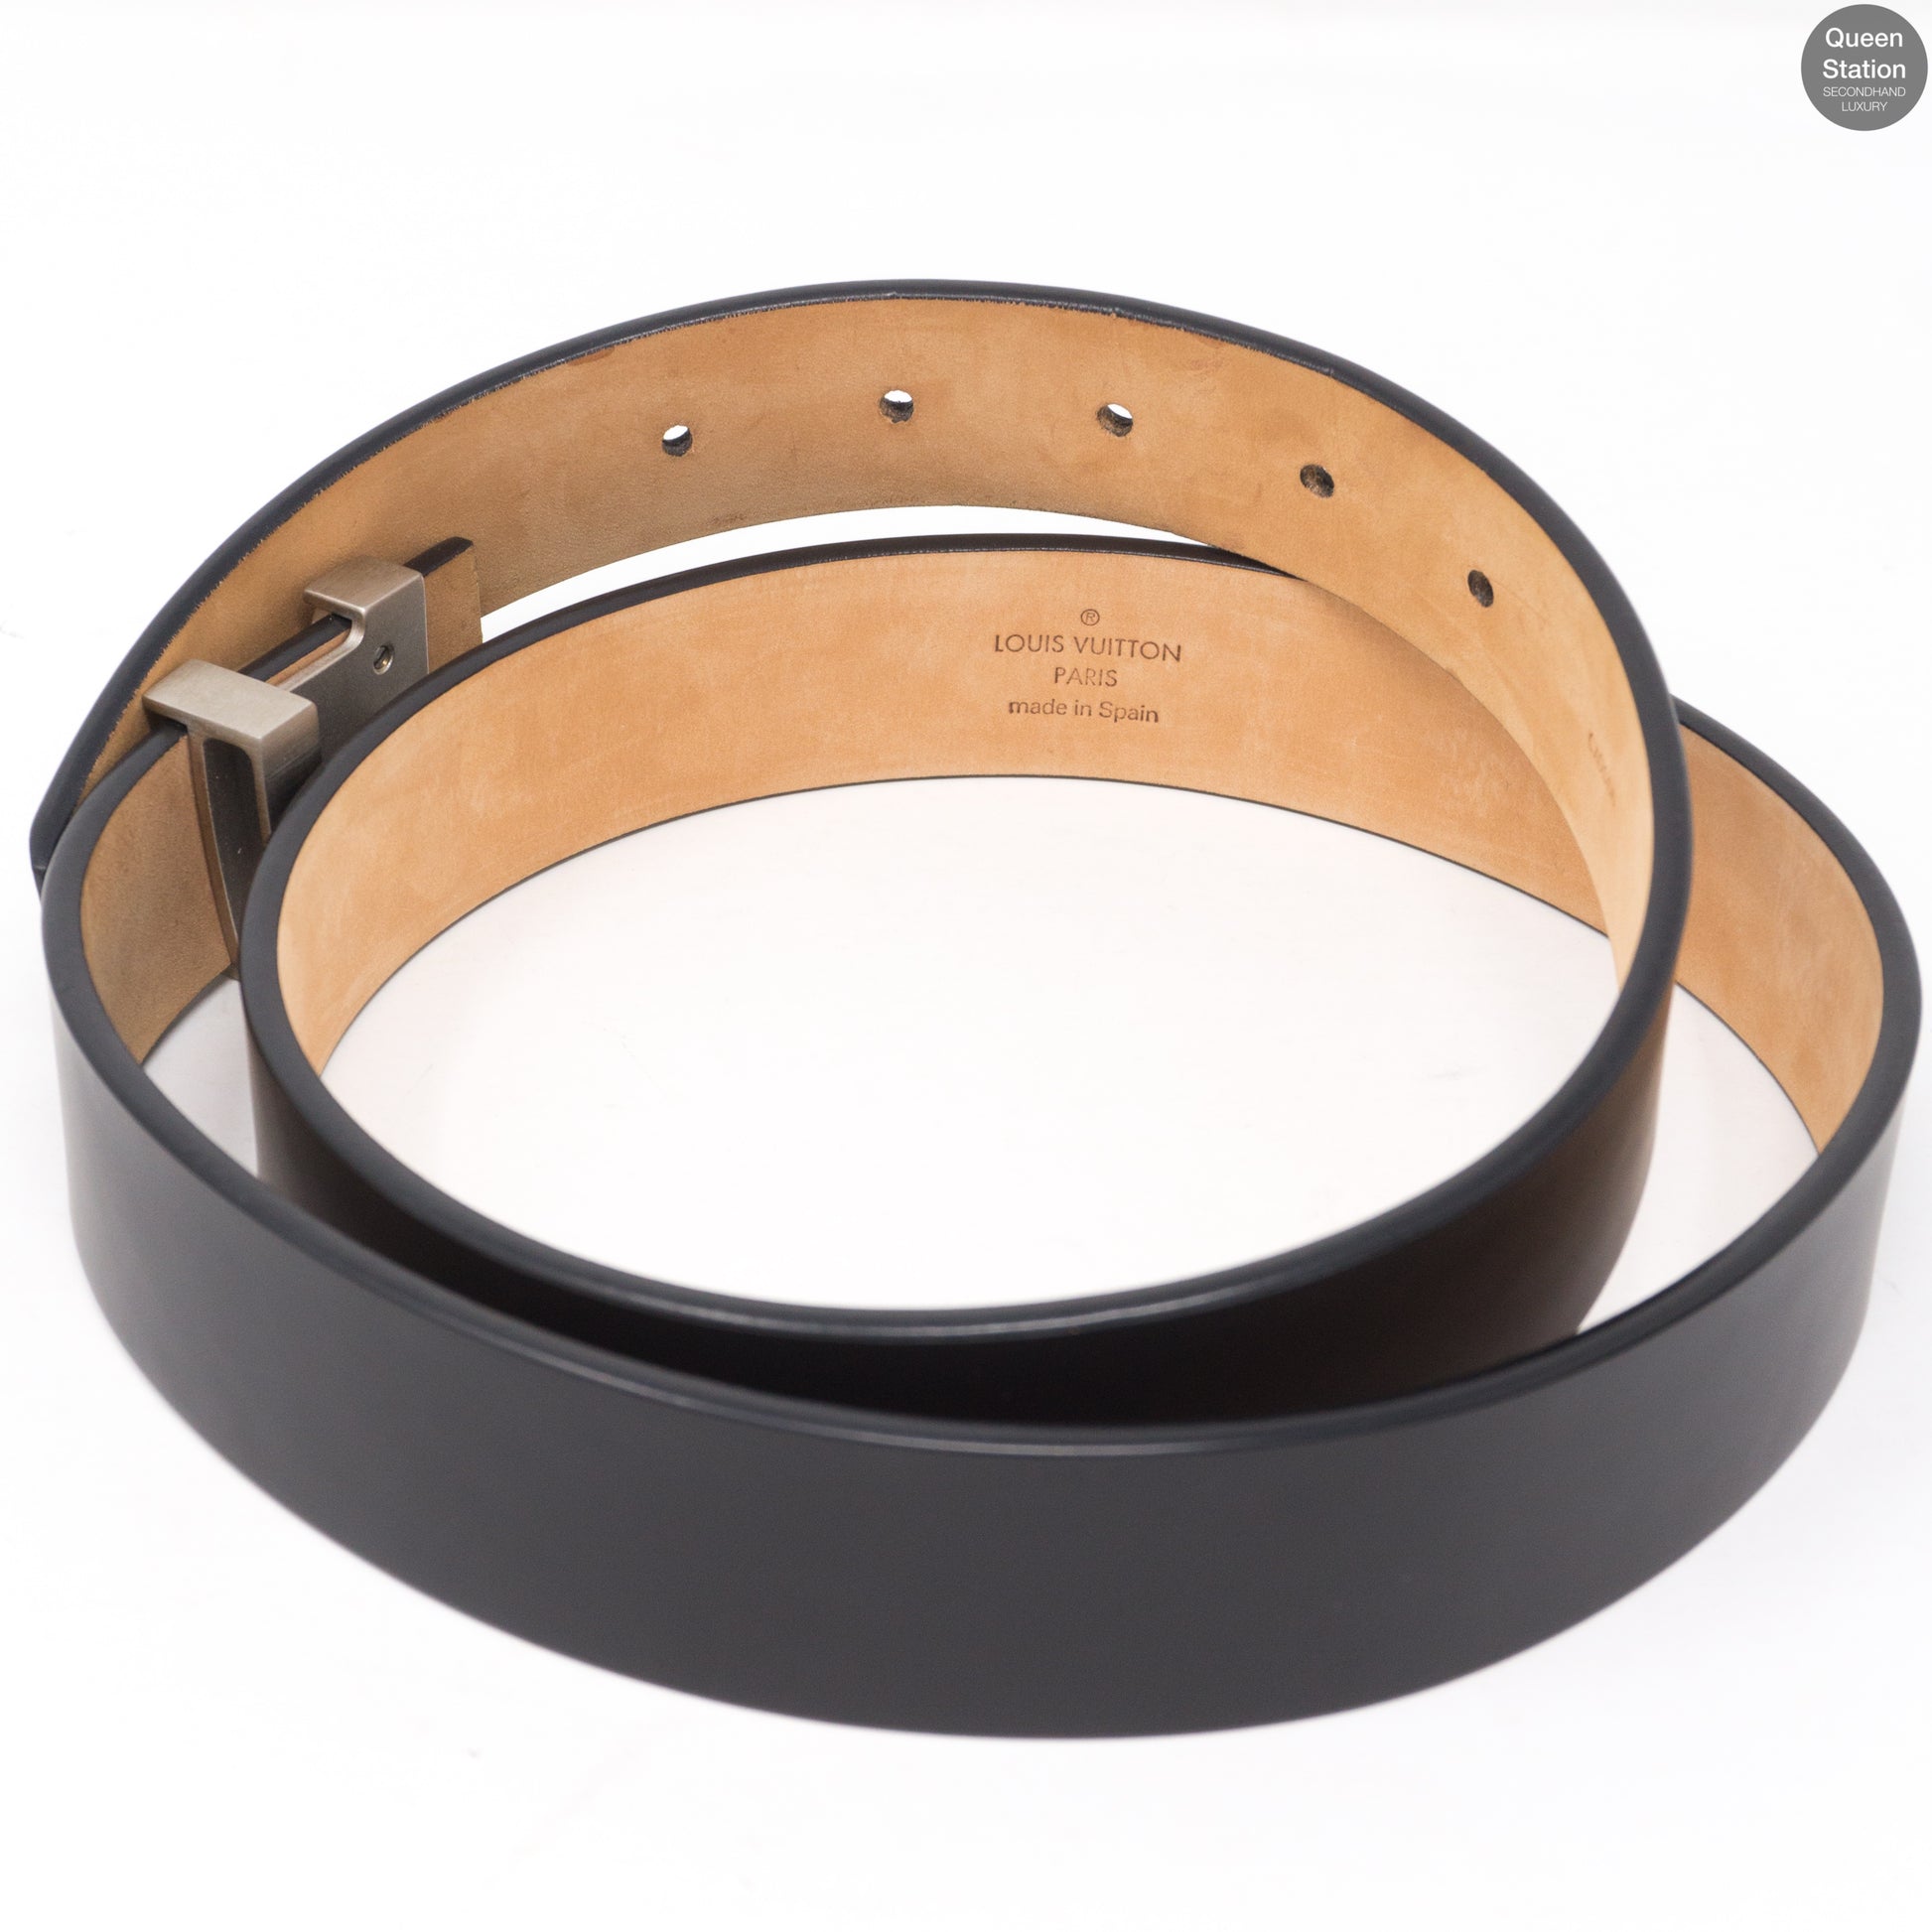 Initiales leather belt Louis Vuitton Black size 85 cm in Leather - 32688820